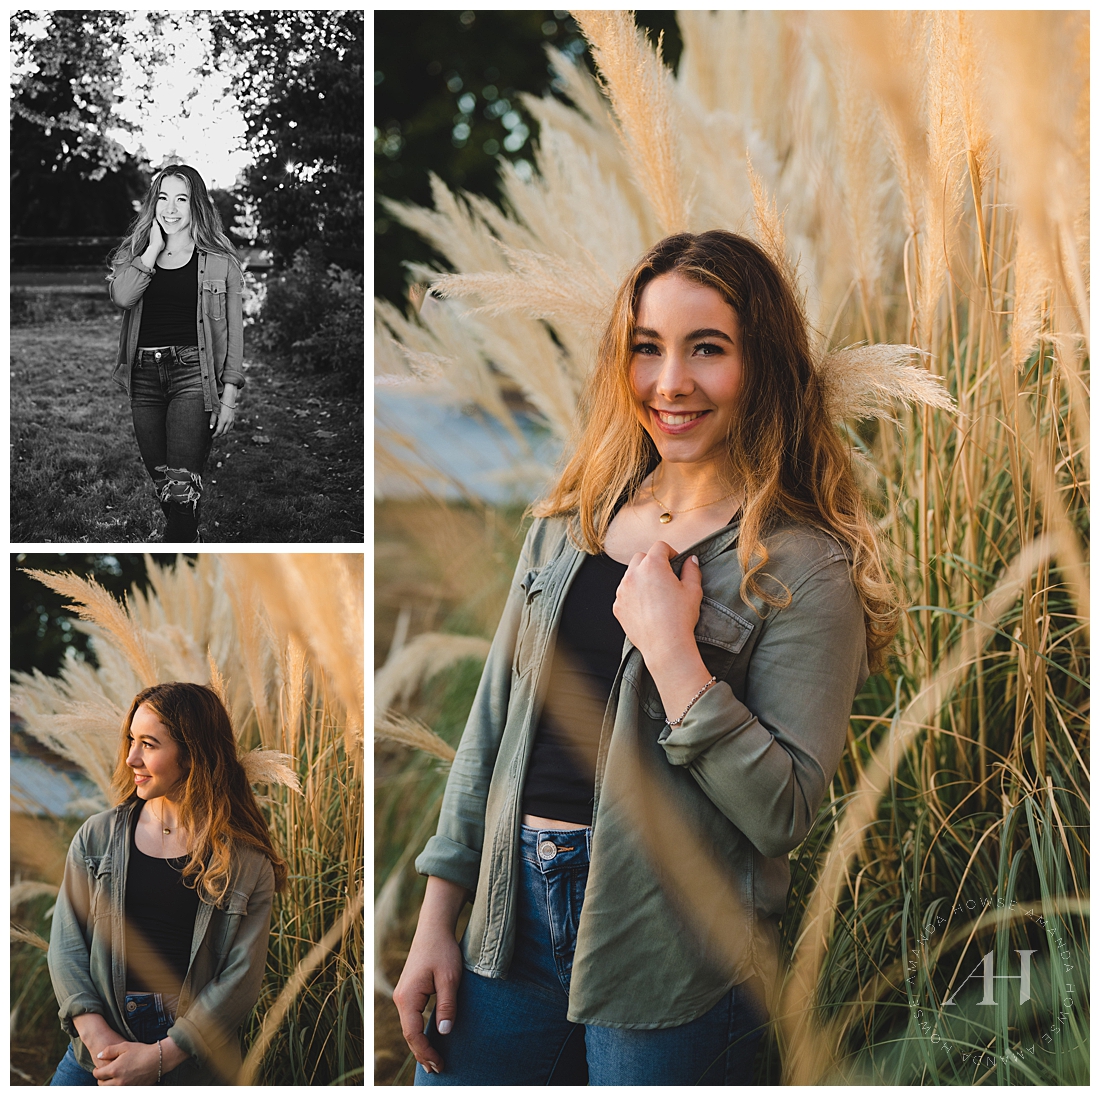 Posing with Nature at Wild Hearts Farm | Tall Dried Grass Senior Portraits, Rustic Photoshoot Ideas, Modern Country Vibes | Photographed by the Best Tacoma Senior Photographer Amanda Howse Photography